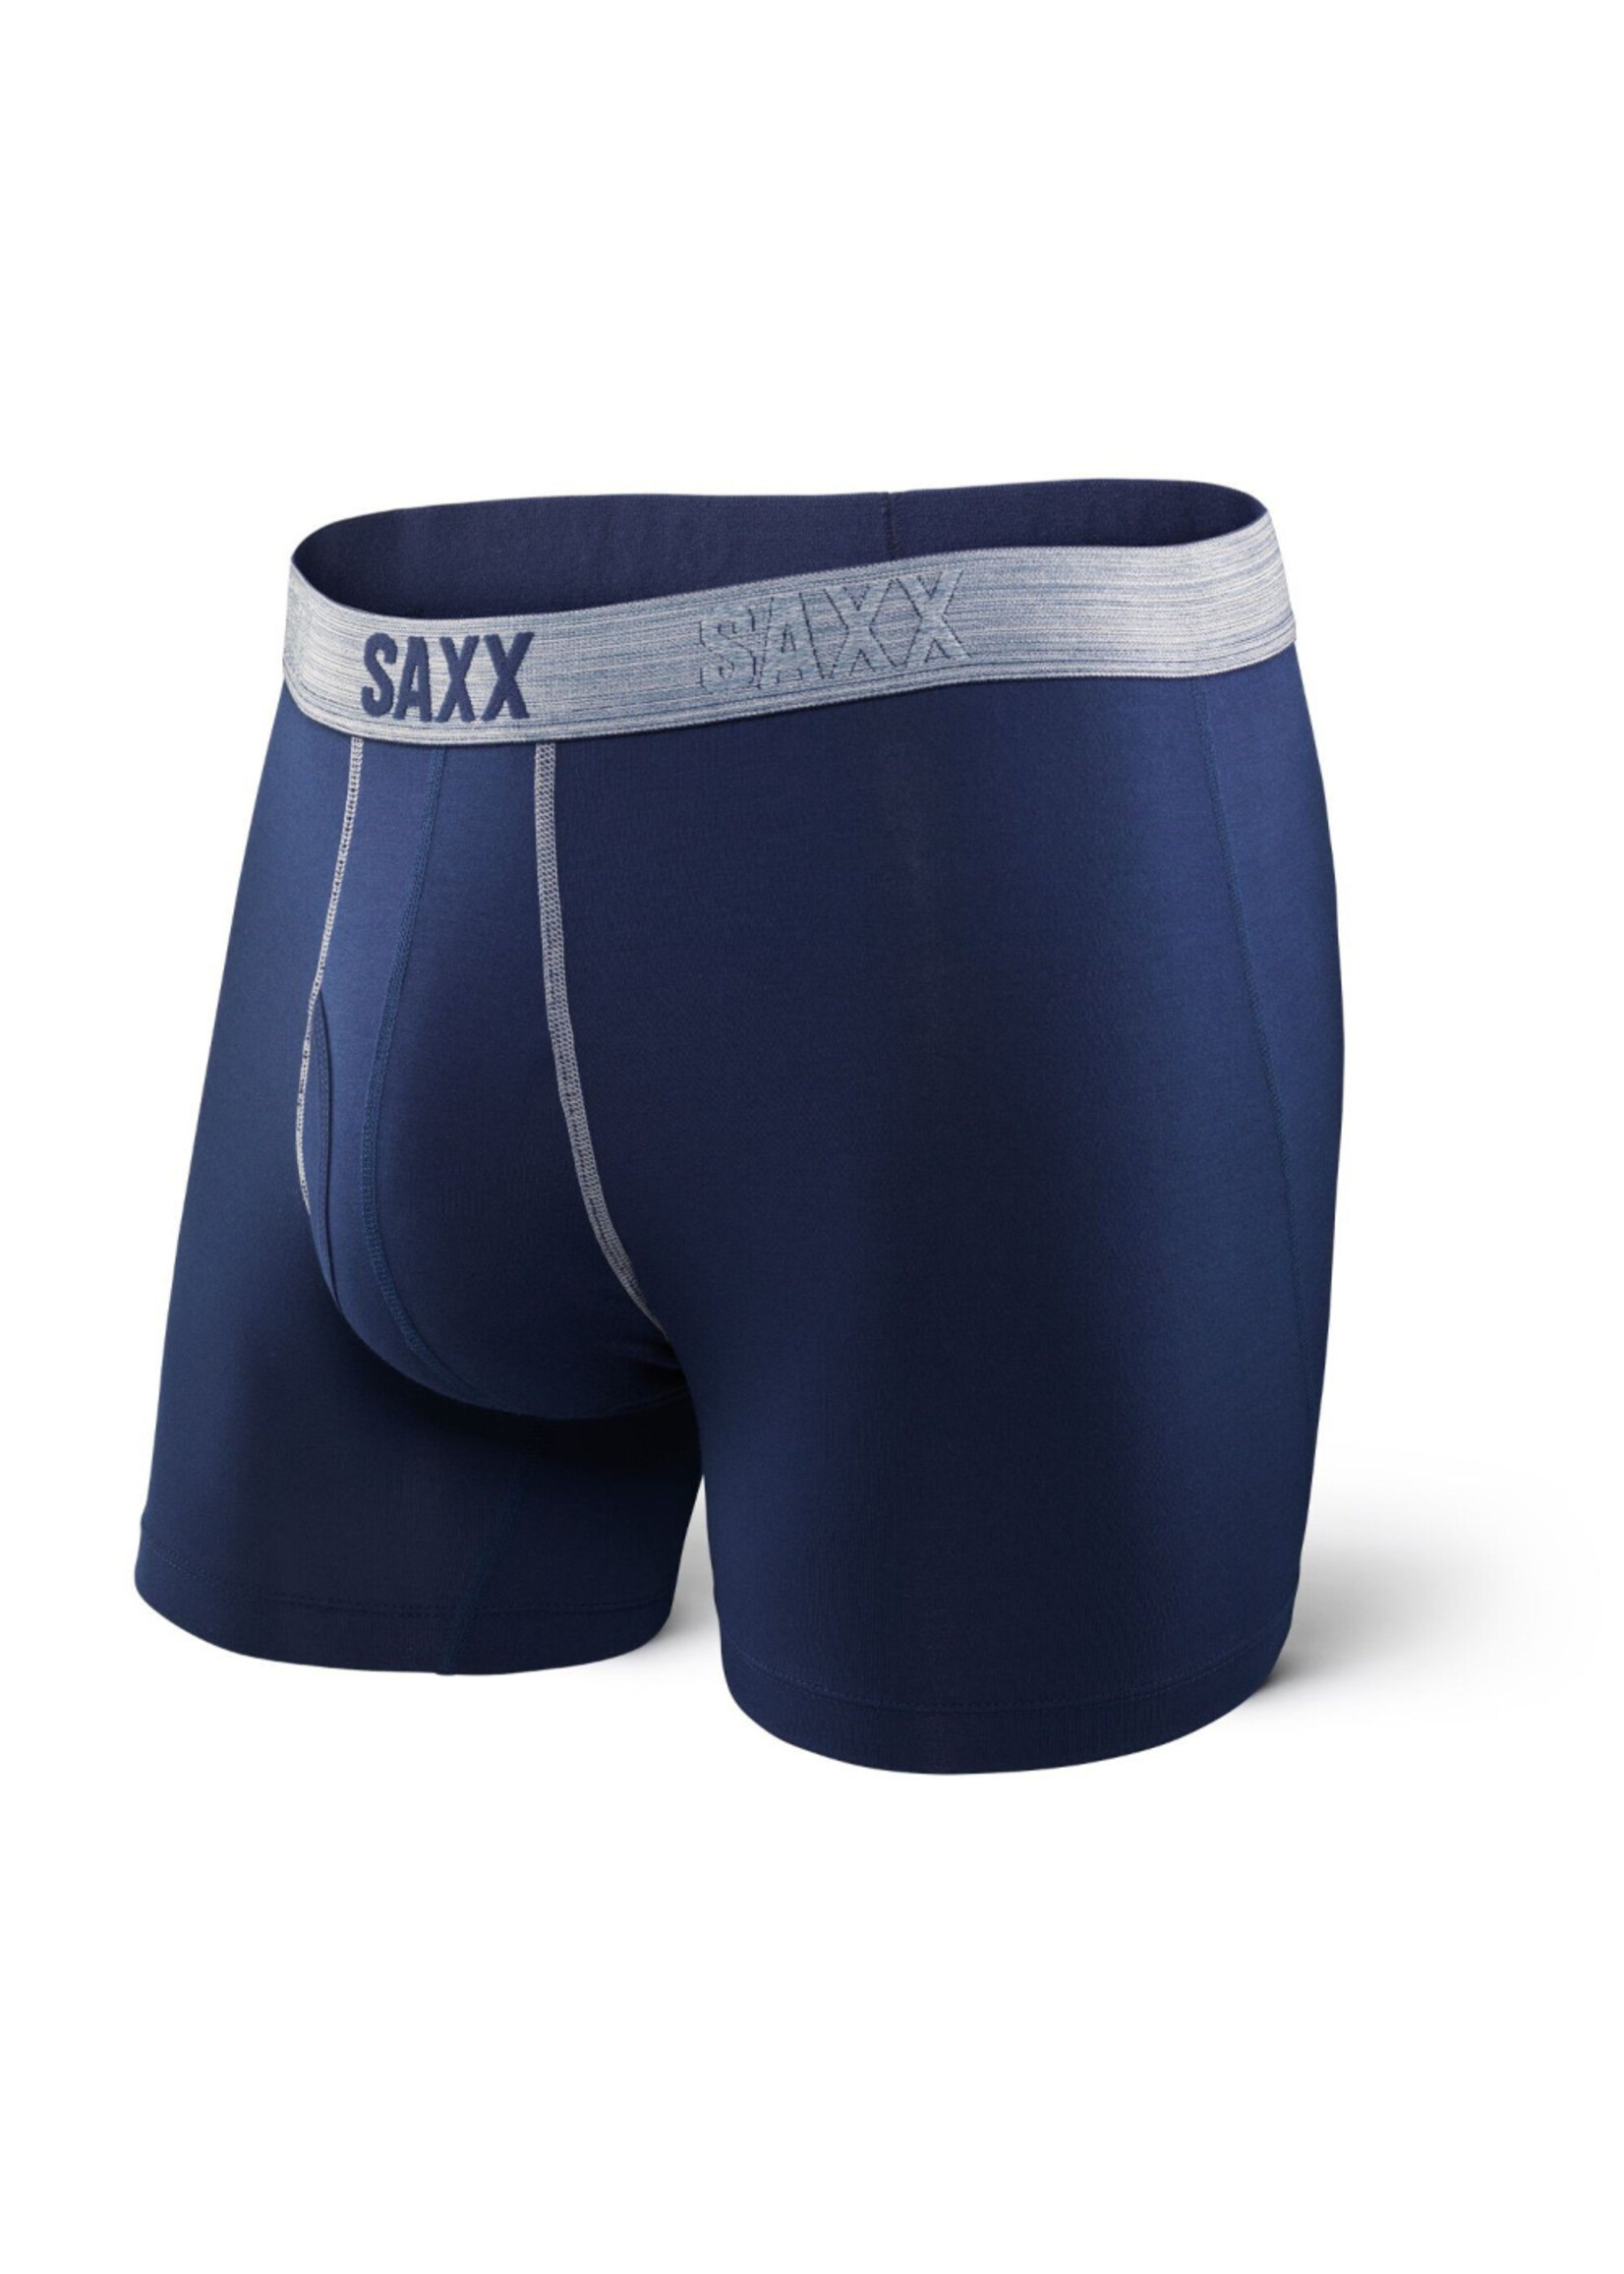 Saxx Platinum Boxer Brief with Fly